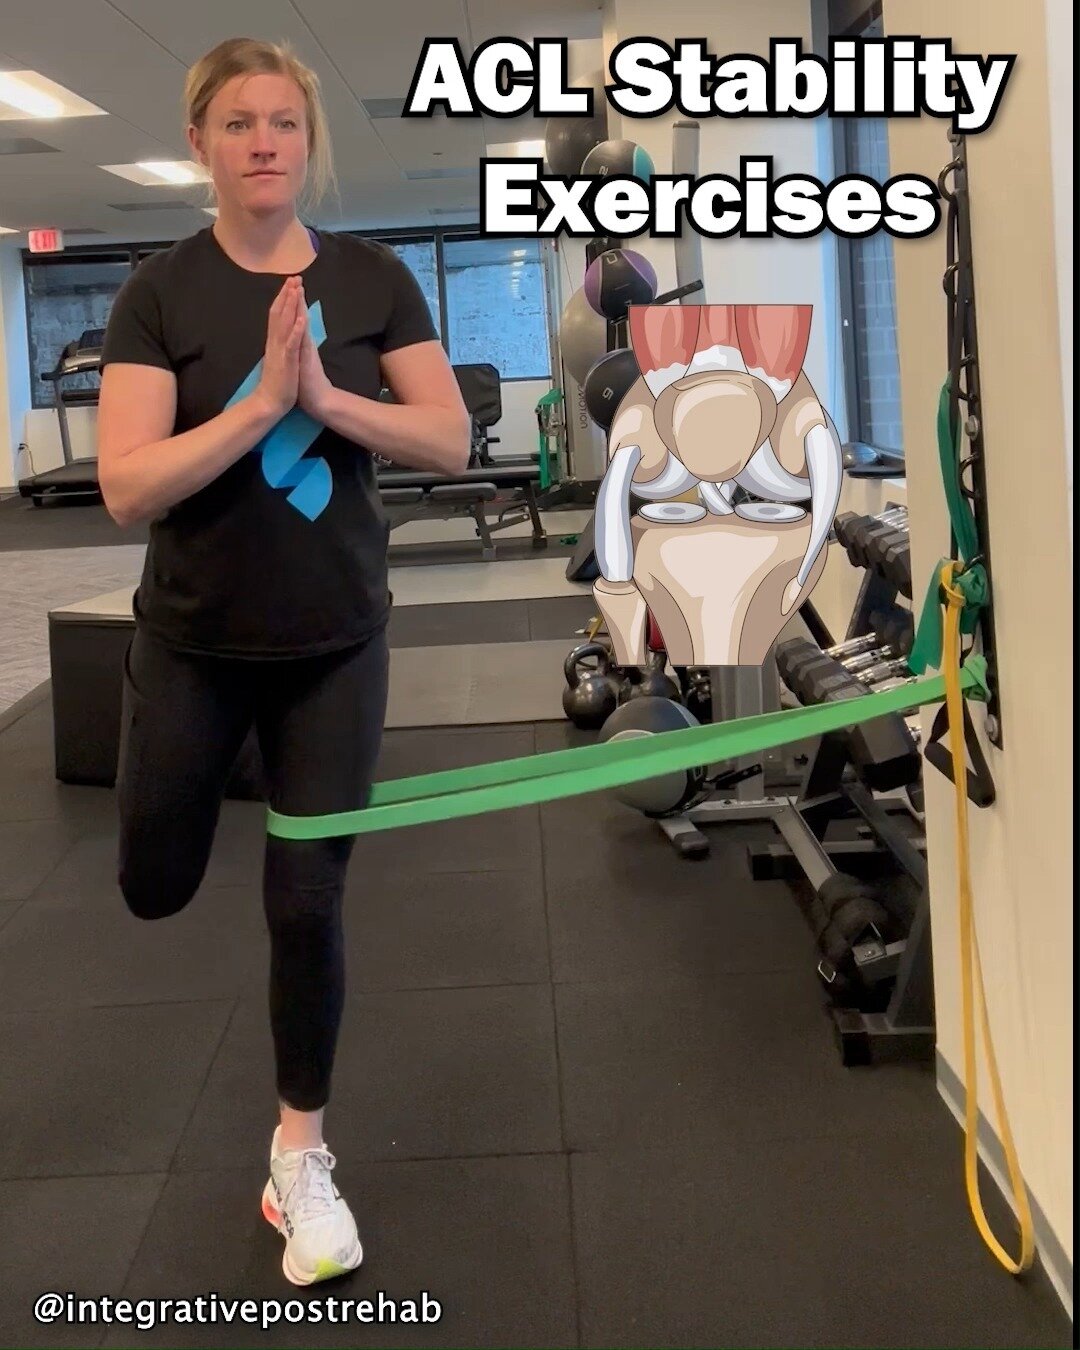 🔥🔥🔥 Maximize your ACL strength and overall knee stability with these advanced resistance exercises! 🔥🔥🔥

#postrehab #postrehabtraining 
#functional #integrative 
#rehabstrengthtrainig #medicalexercisespecialist #fitnessguide #postphysicaltherap